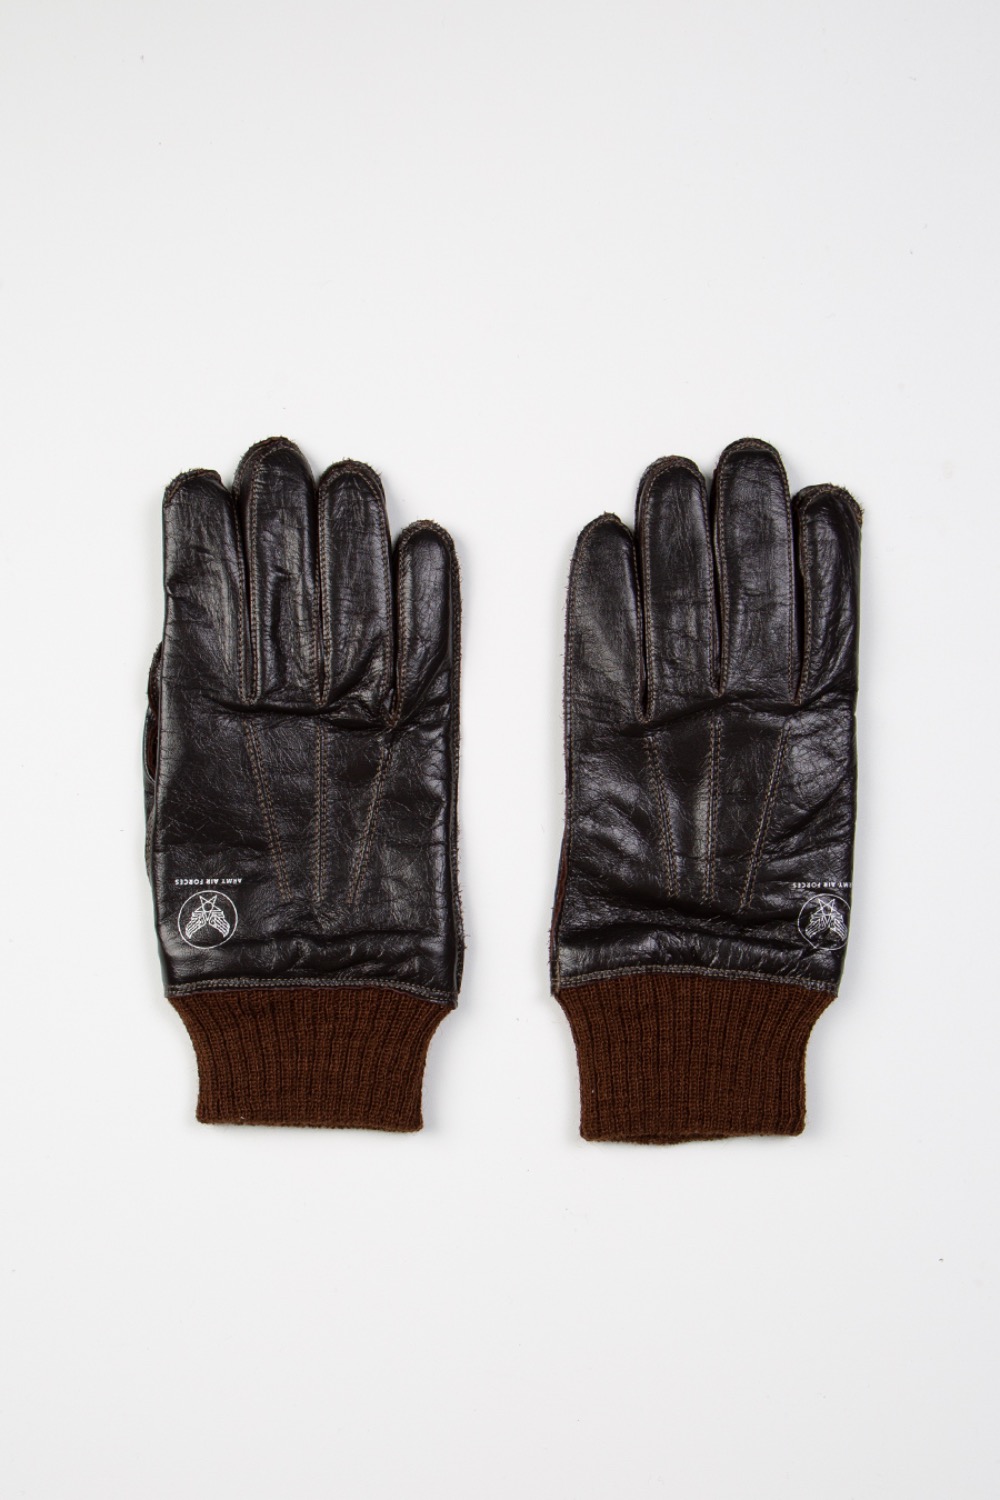 A-10 GLOVES, FLYING WINTER